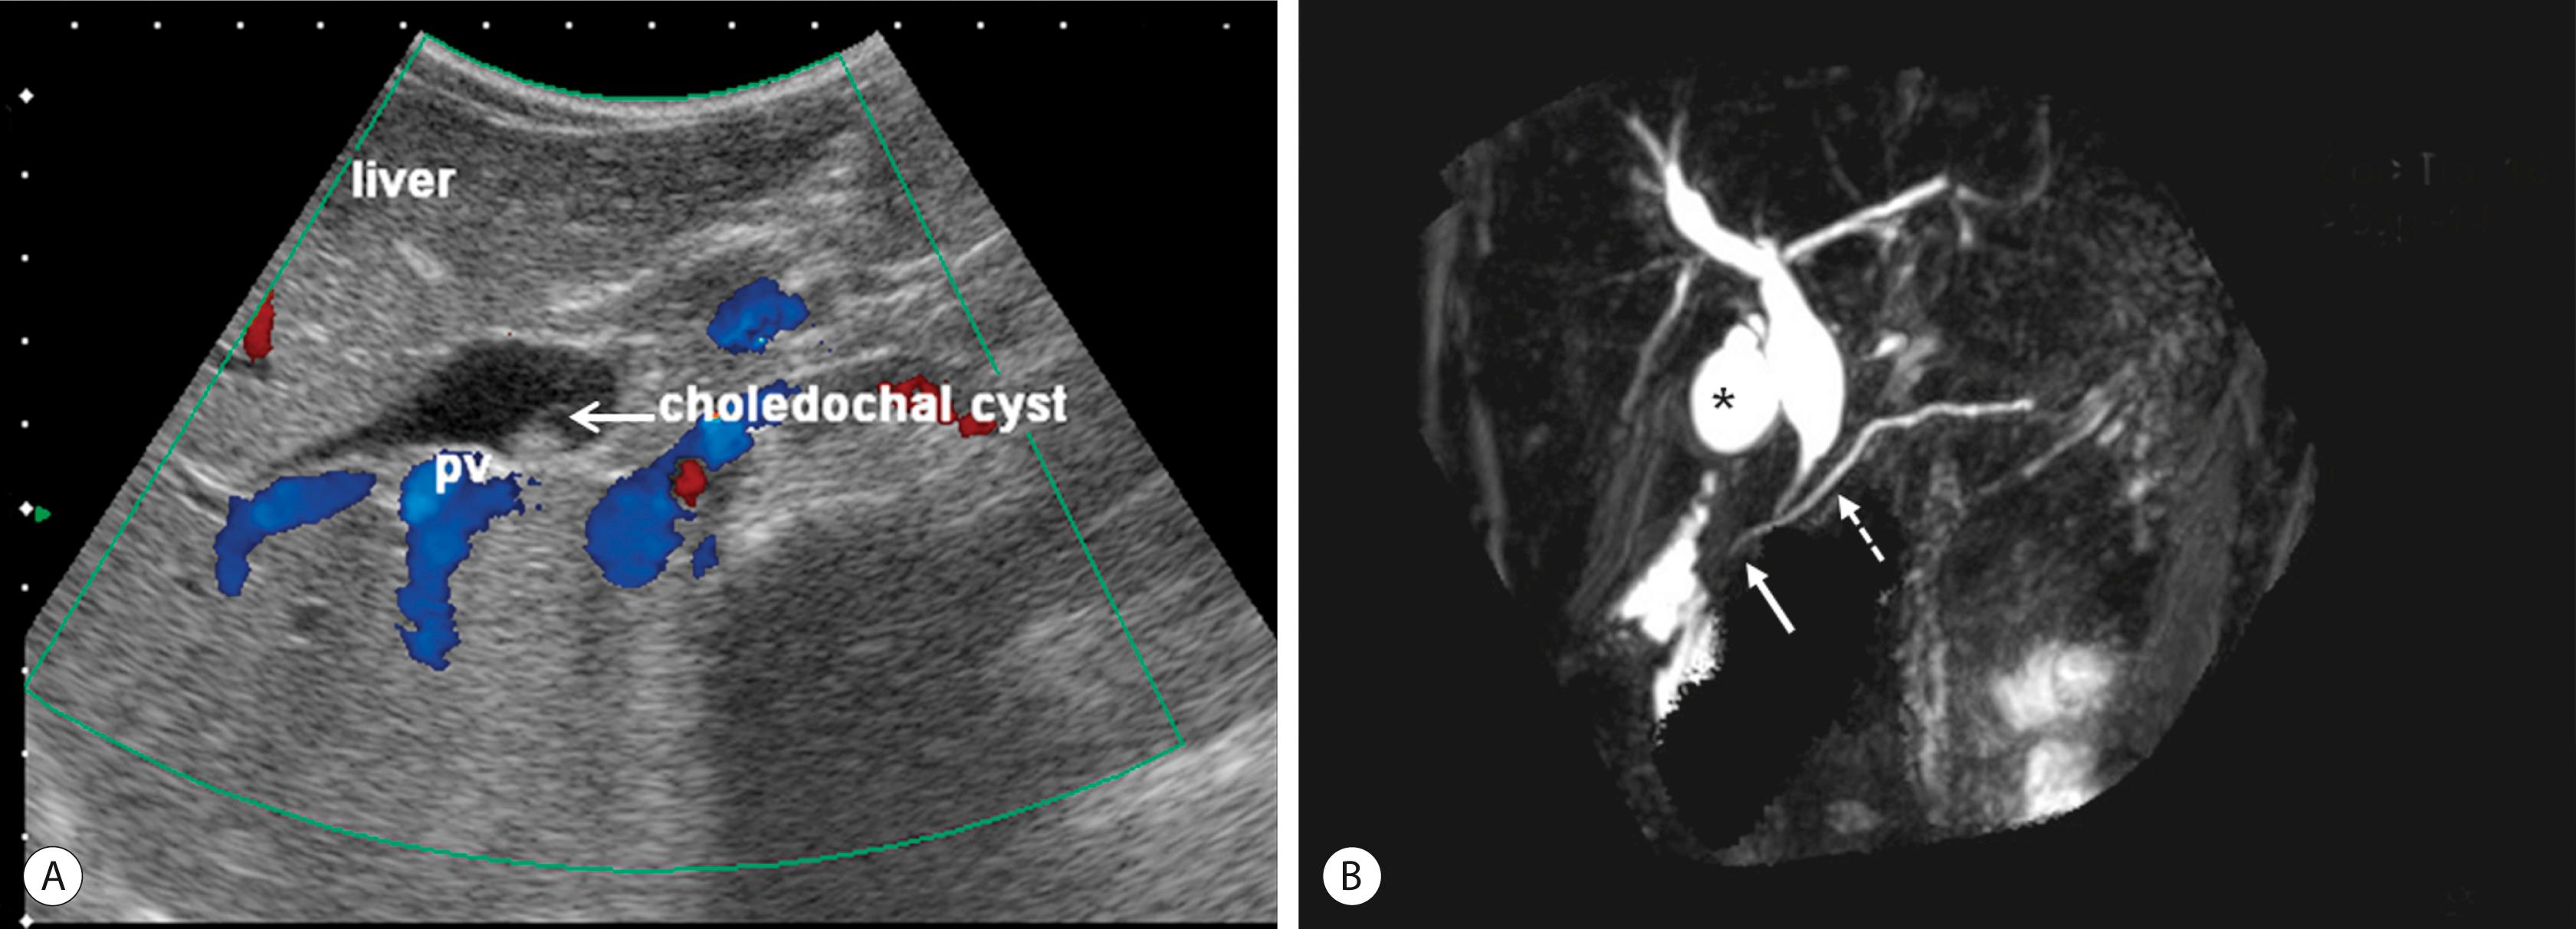 Fig. 44.3, (A) Ultrasound is the initial imaging method of choice for identifying a choledochal cyst. The cyst is identified as well as the portal vein (pv) lying posterior to it. (B) MRCP is highly accurate in the detection and classification of the cyst. On this MRCP image, note the fusiform choledochal cyst as well as the pancreatic duct (dotted arrow) and long common channel (solid arrow). The gallbladder is marked with an asterisk.